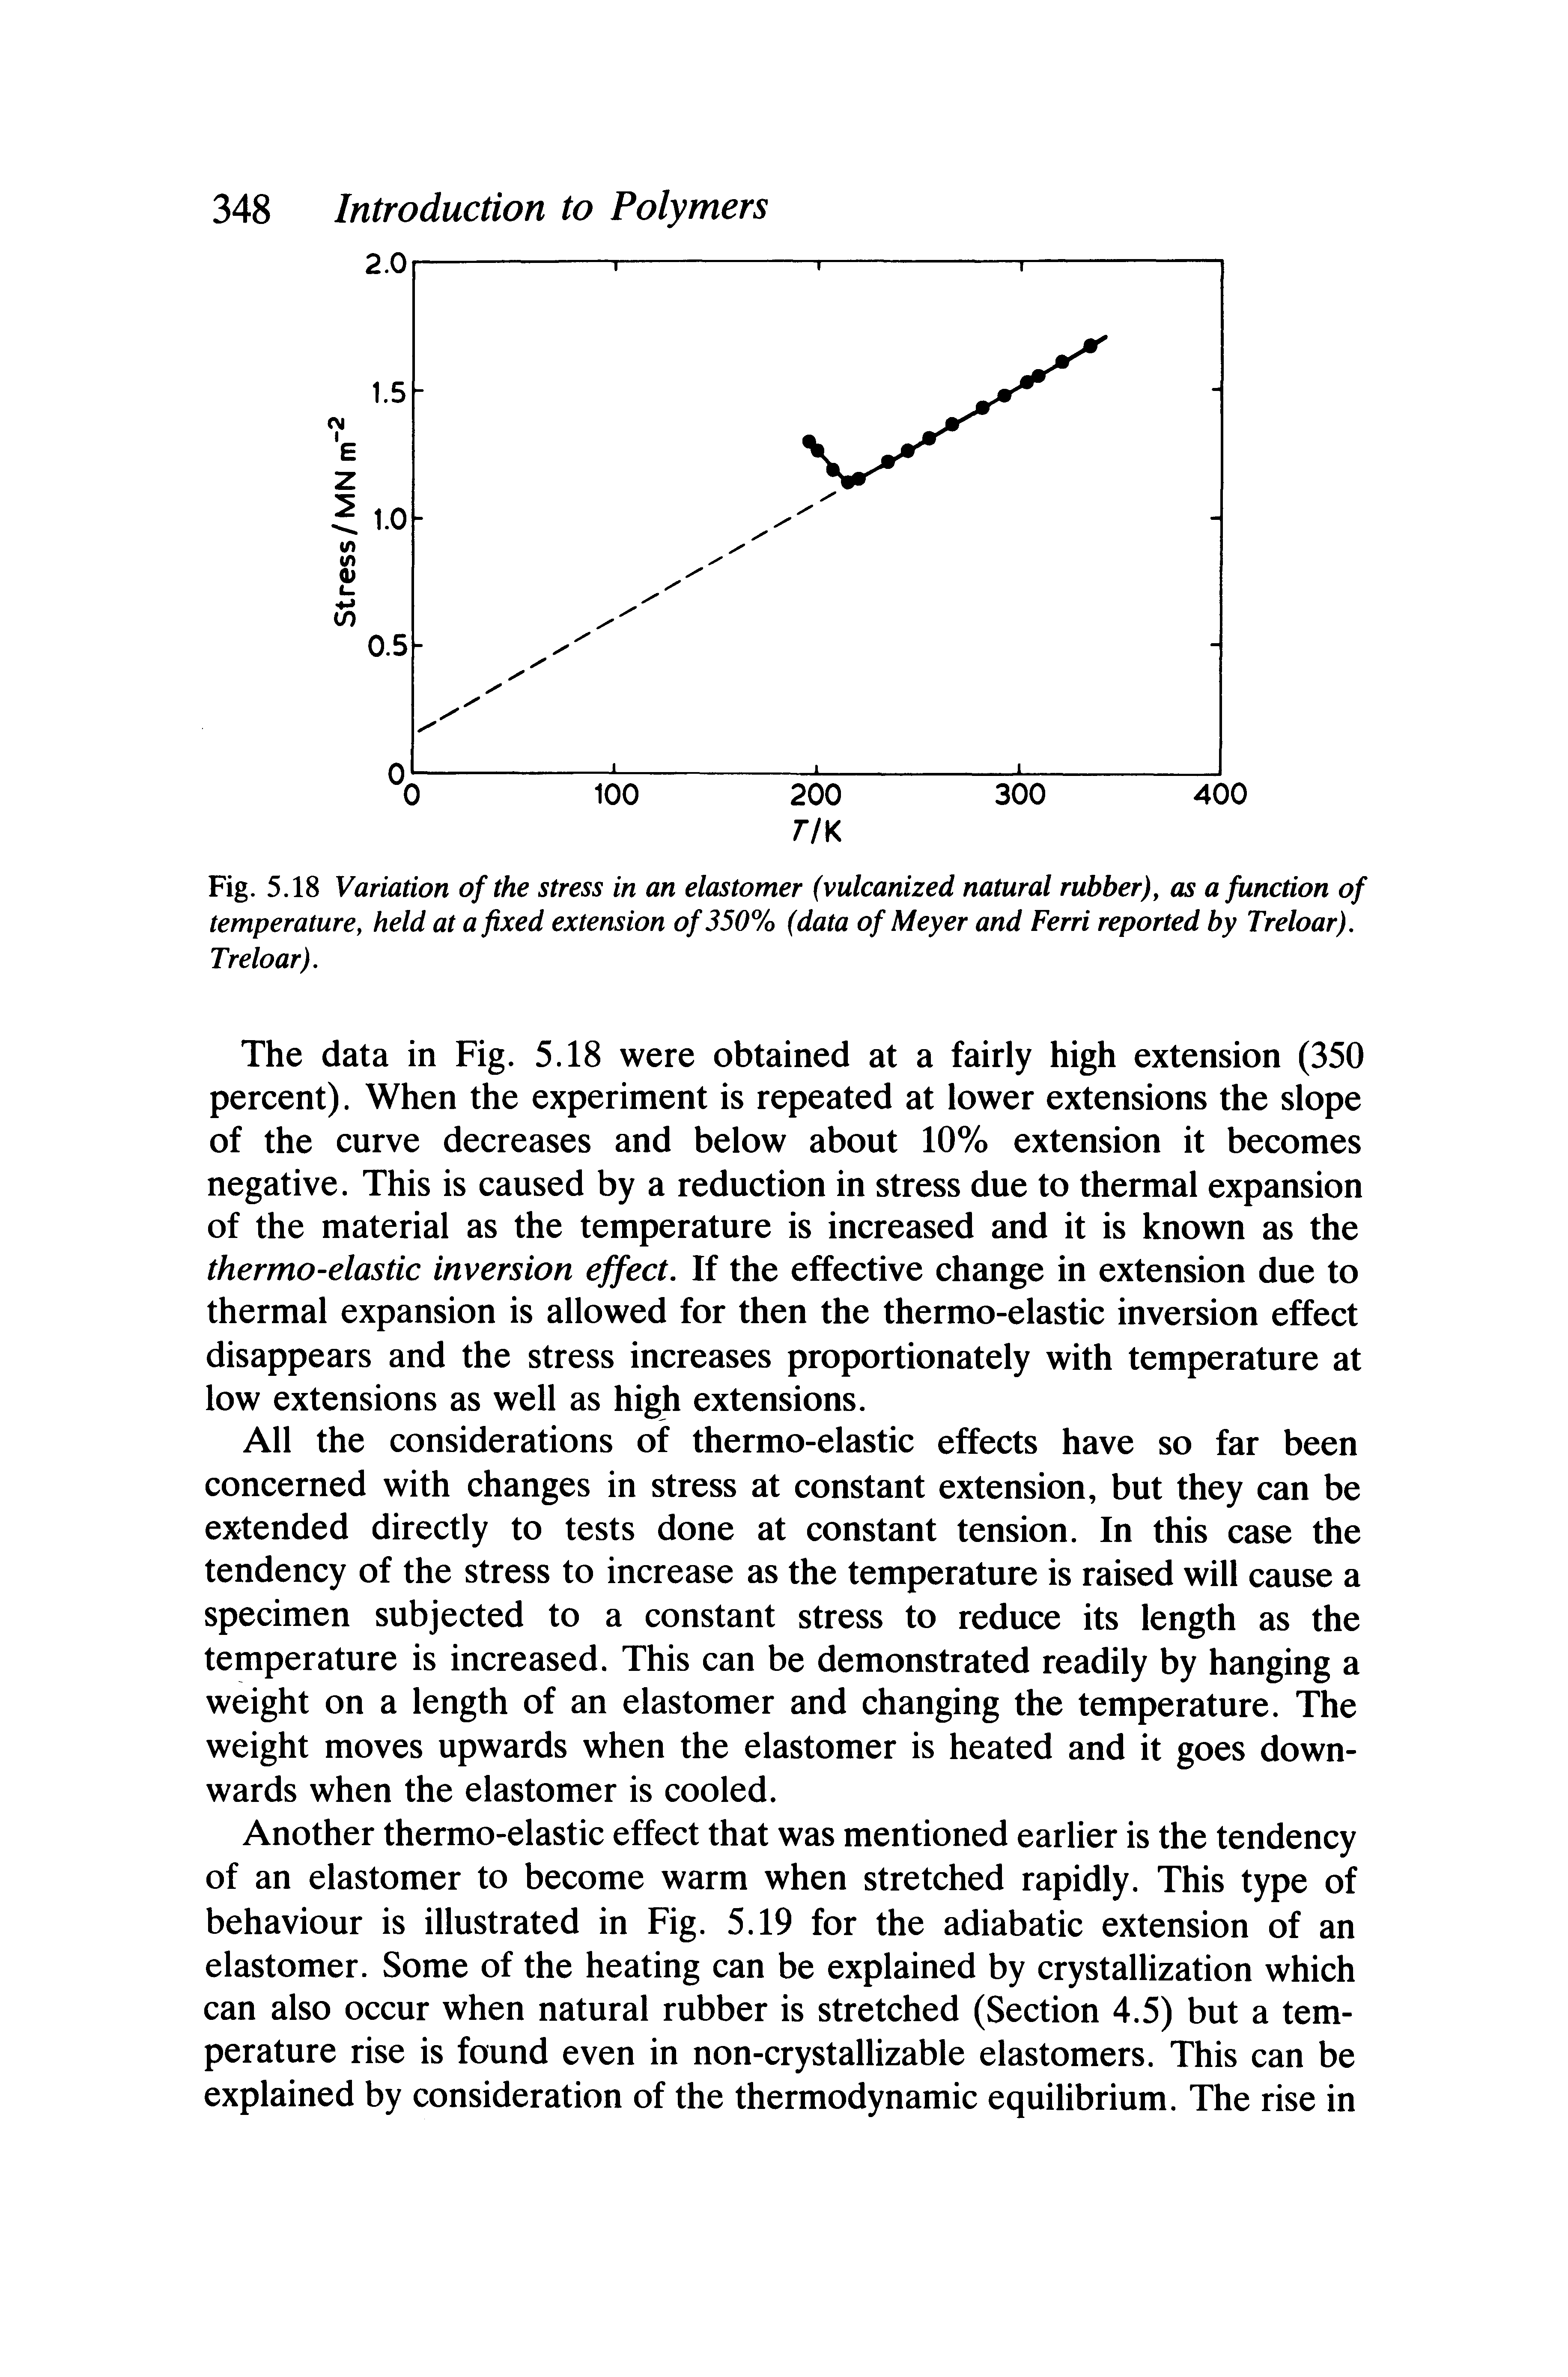 Fig. 5.18 Variation of the stress in an elastomer (vulcanized natural rubber), as a function of temperature, held at a fixed extension of350% (data of Meyer and Ferri reported by Treloar). Treloar).